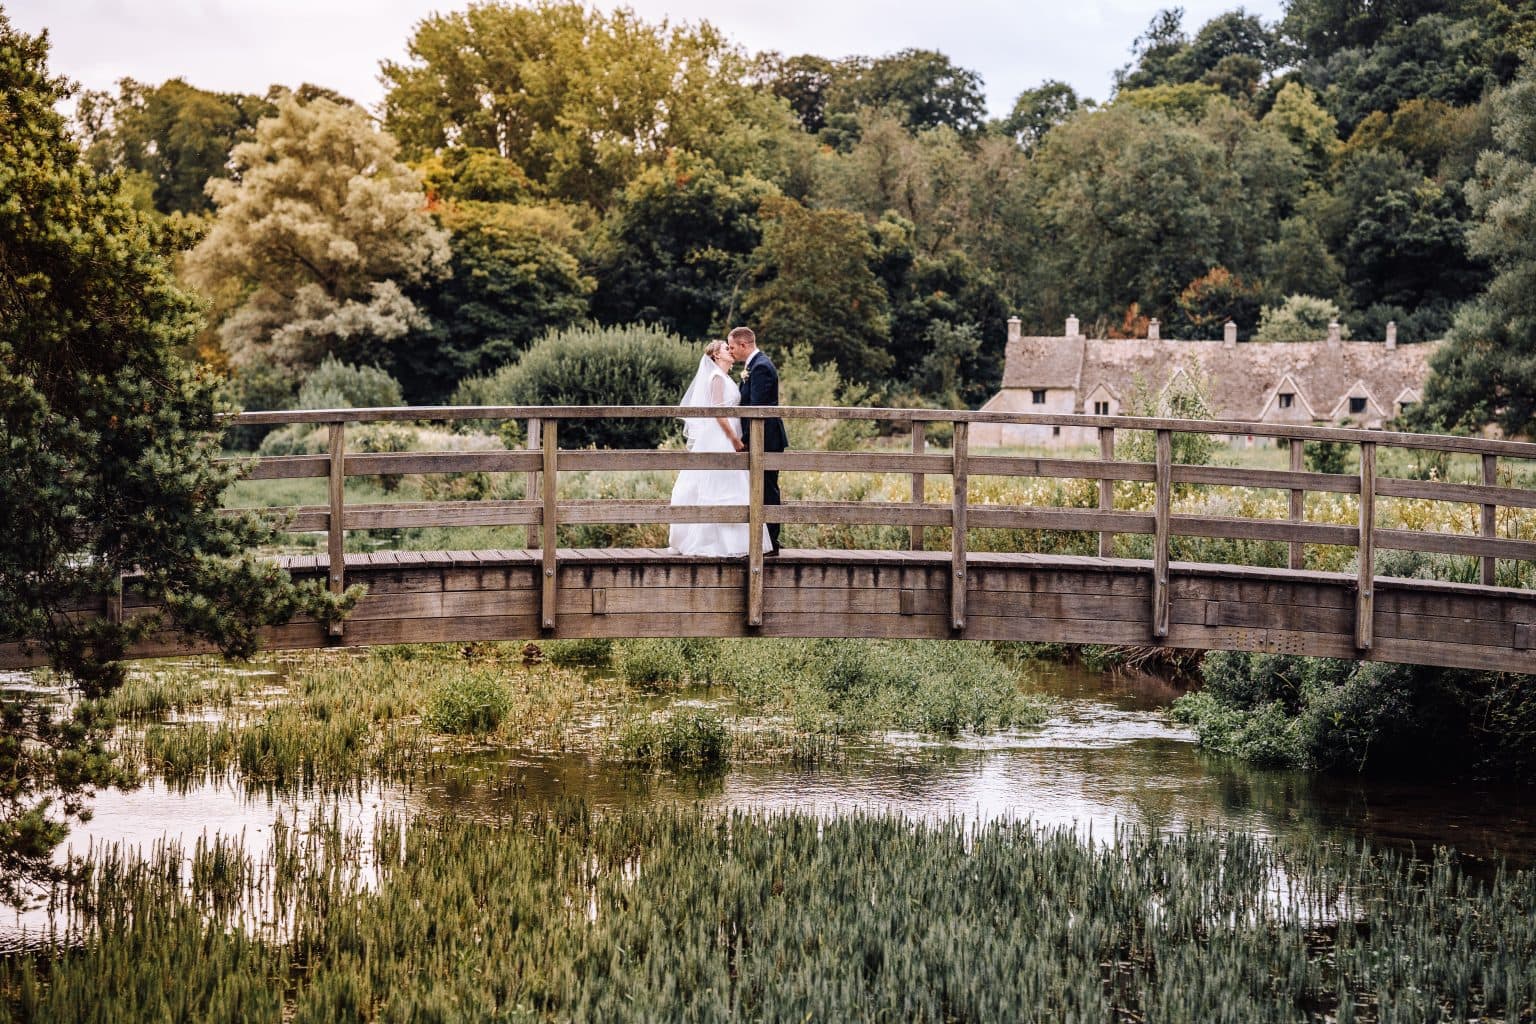 Summer wedding at The Swan Hotel in Bibury with Laura and Phil kissing on the bridge, overlooking the gorgeous Bibury landscape.